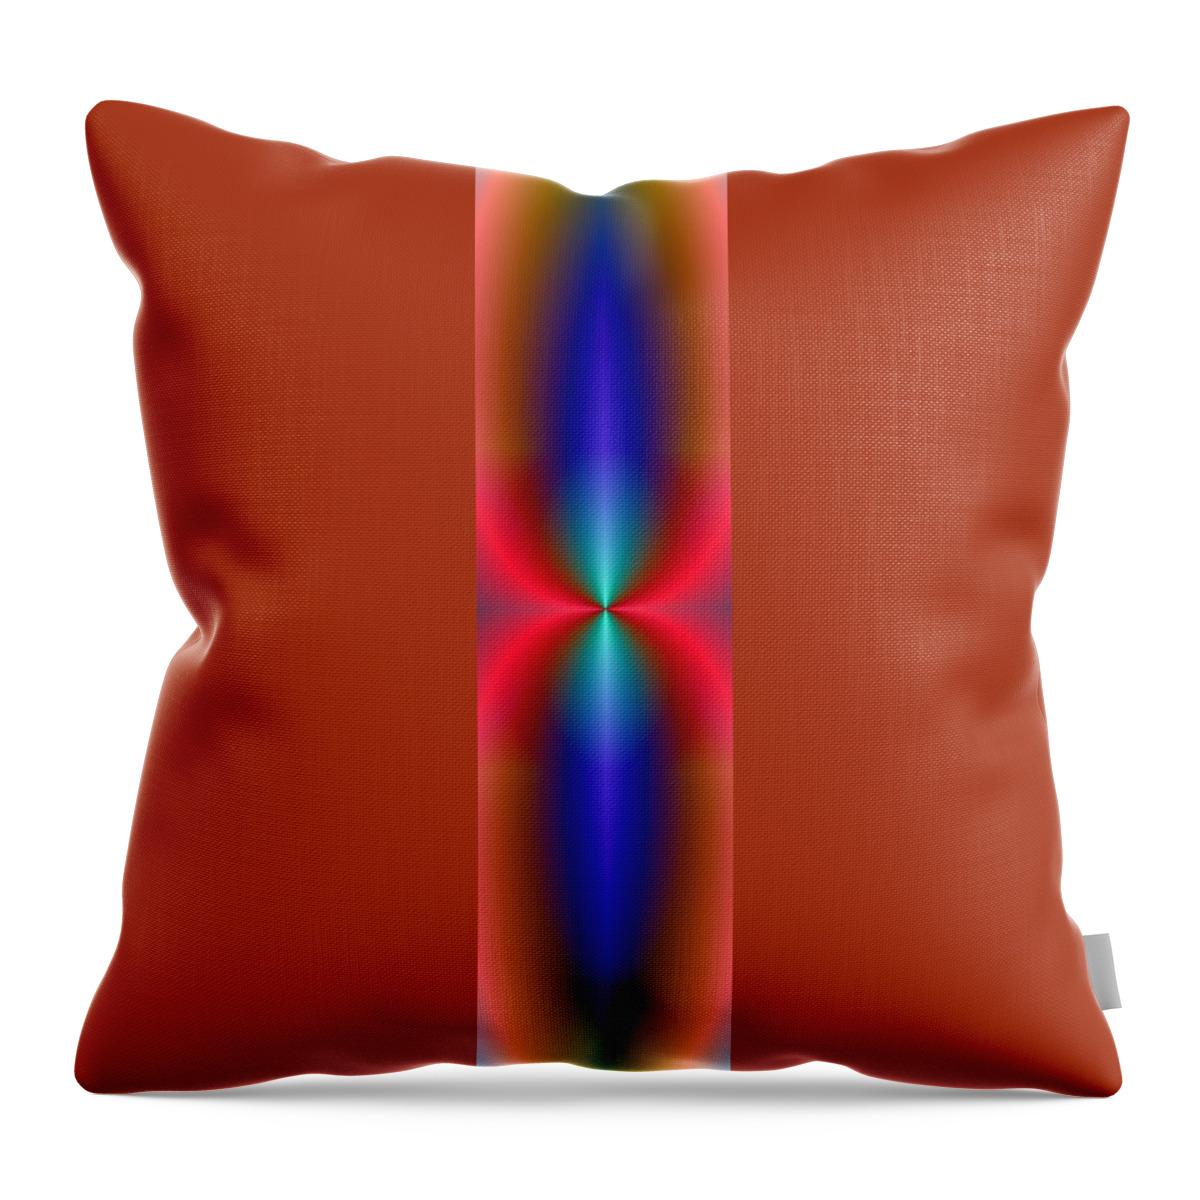 Blue Throw Pillow featuring the digital art Blue Flame by Ester McGuire